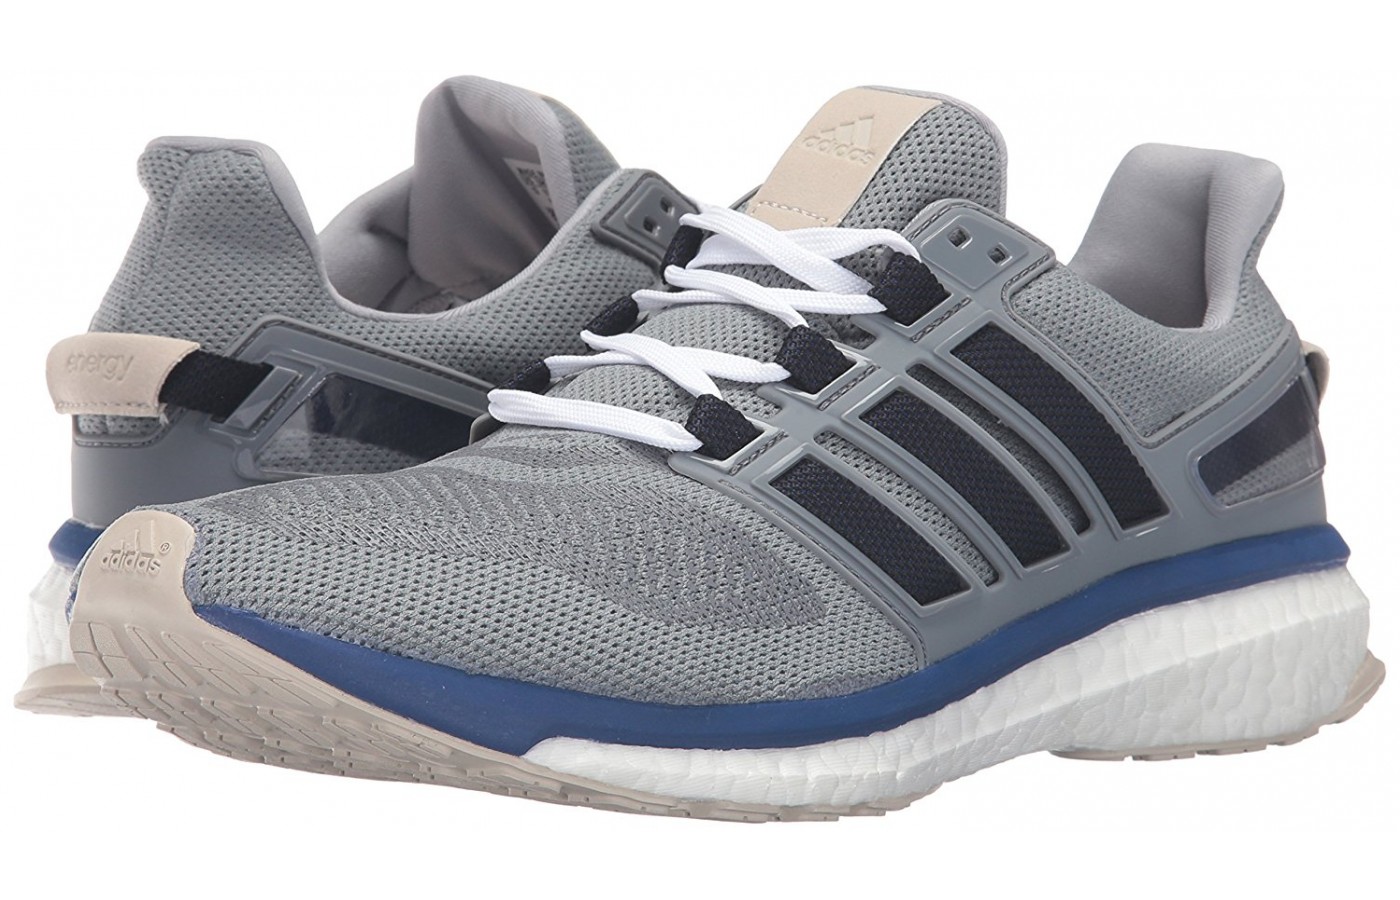 Adidas Energy Boost 3 Tested for Performance in 2021 | WalkJogRun